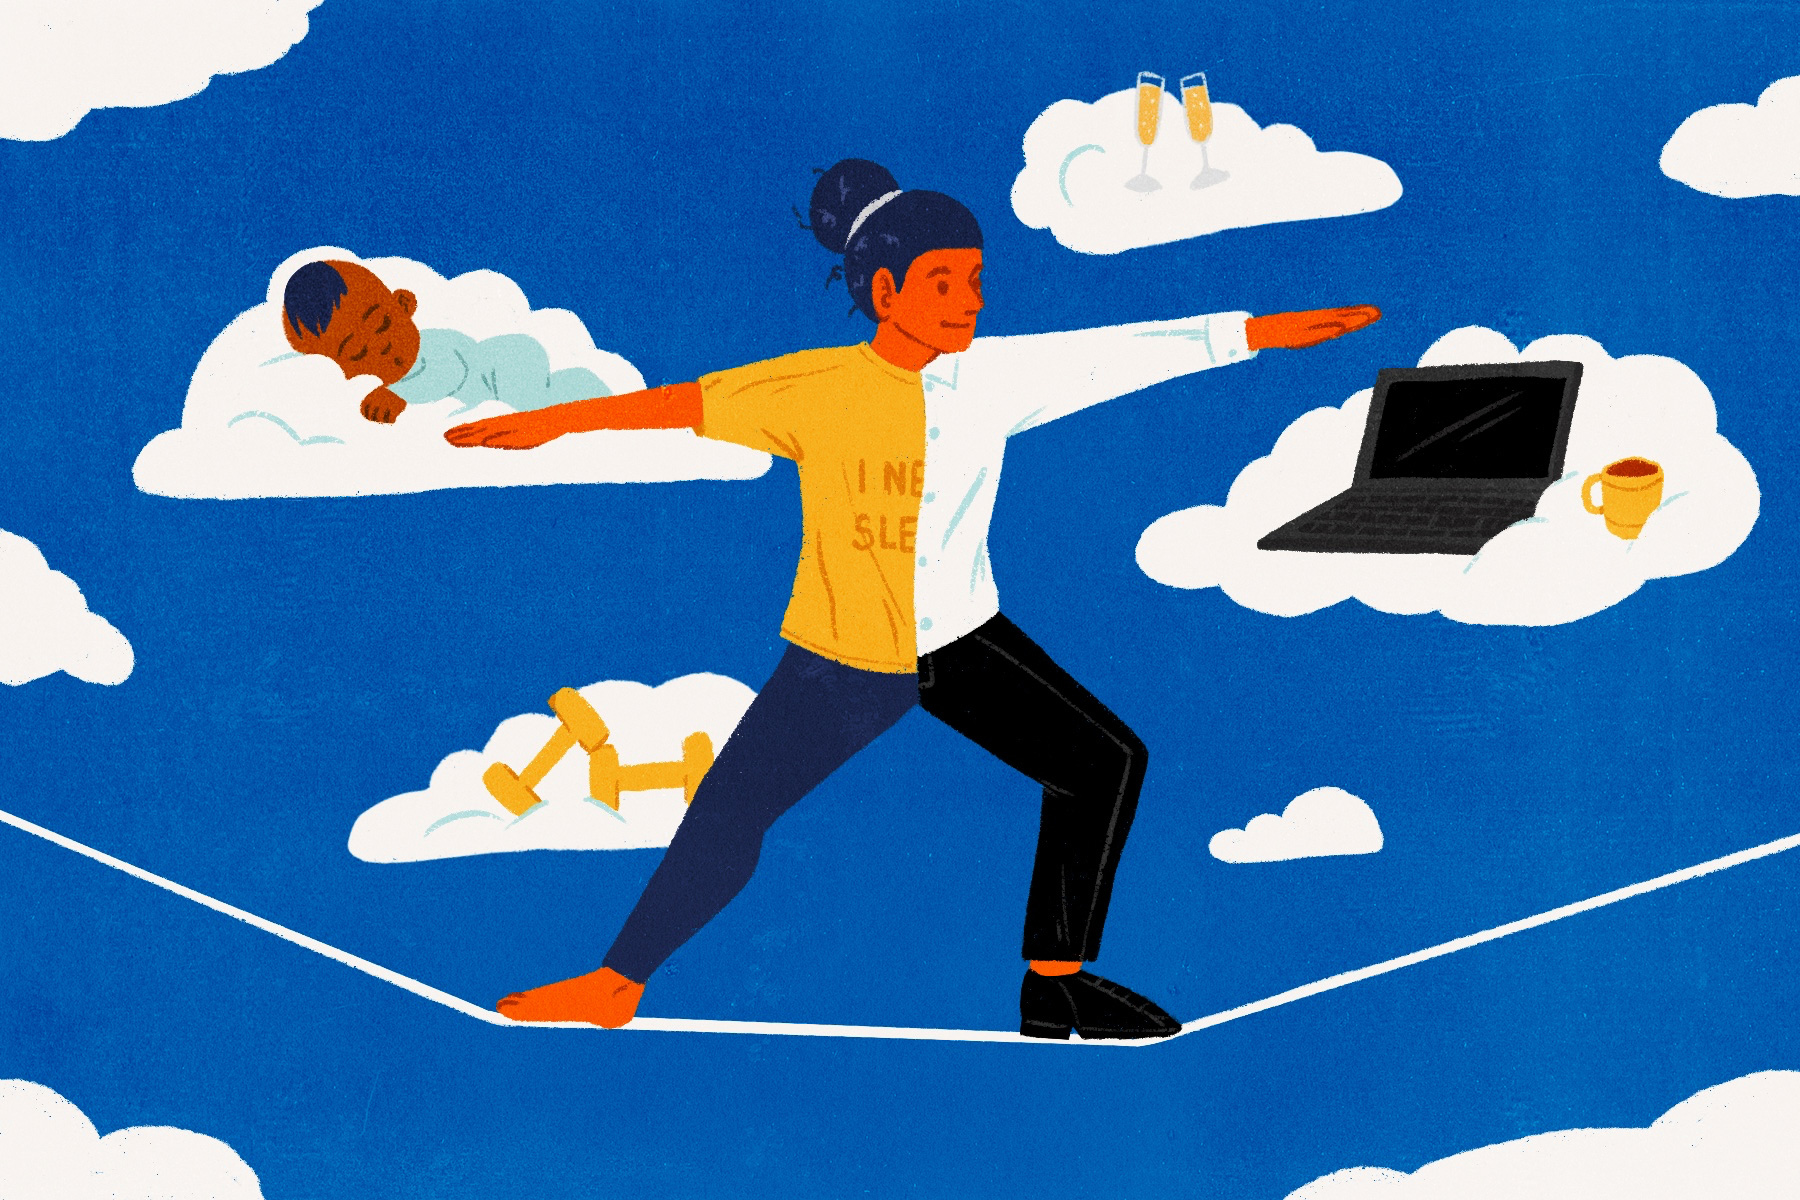 An illustration of a woman walking a tightrope, with a baby to the left of her and a computer to the right